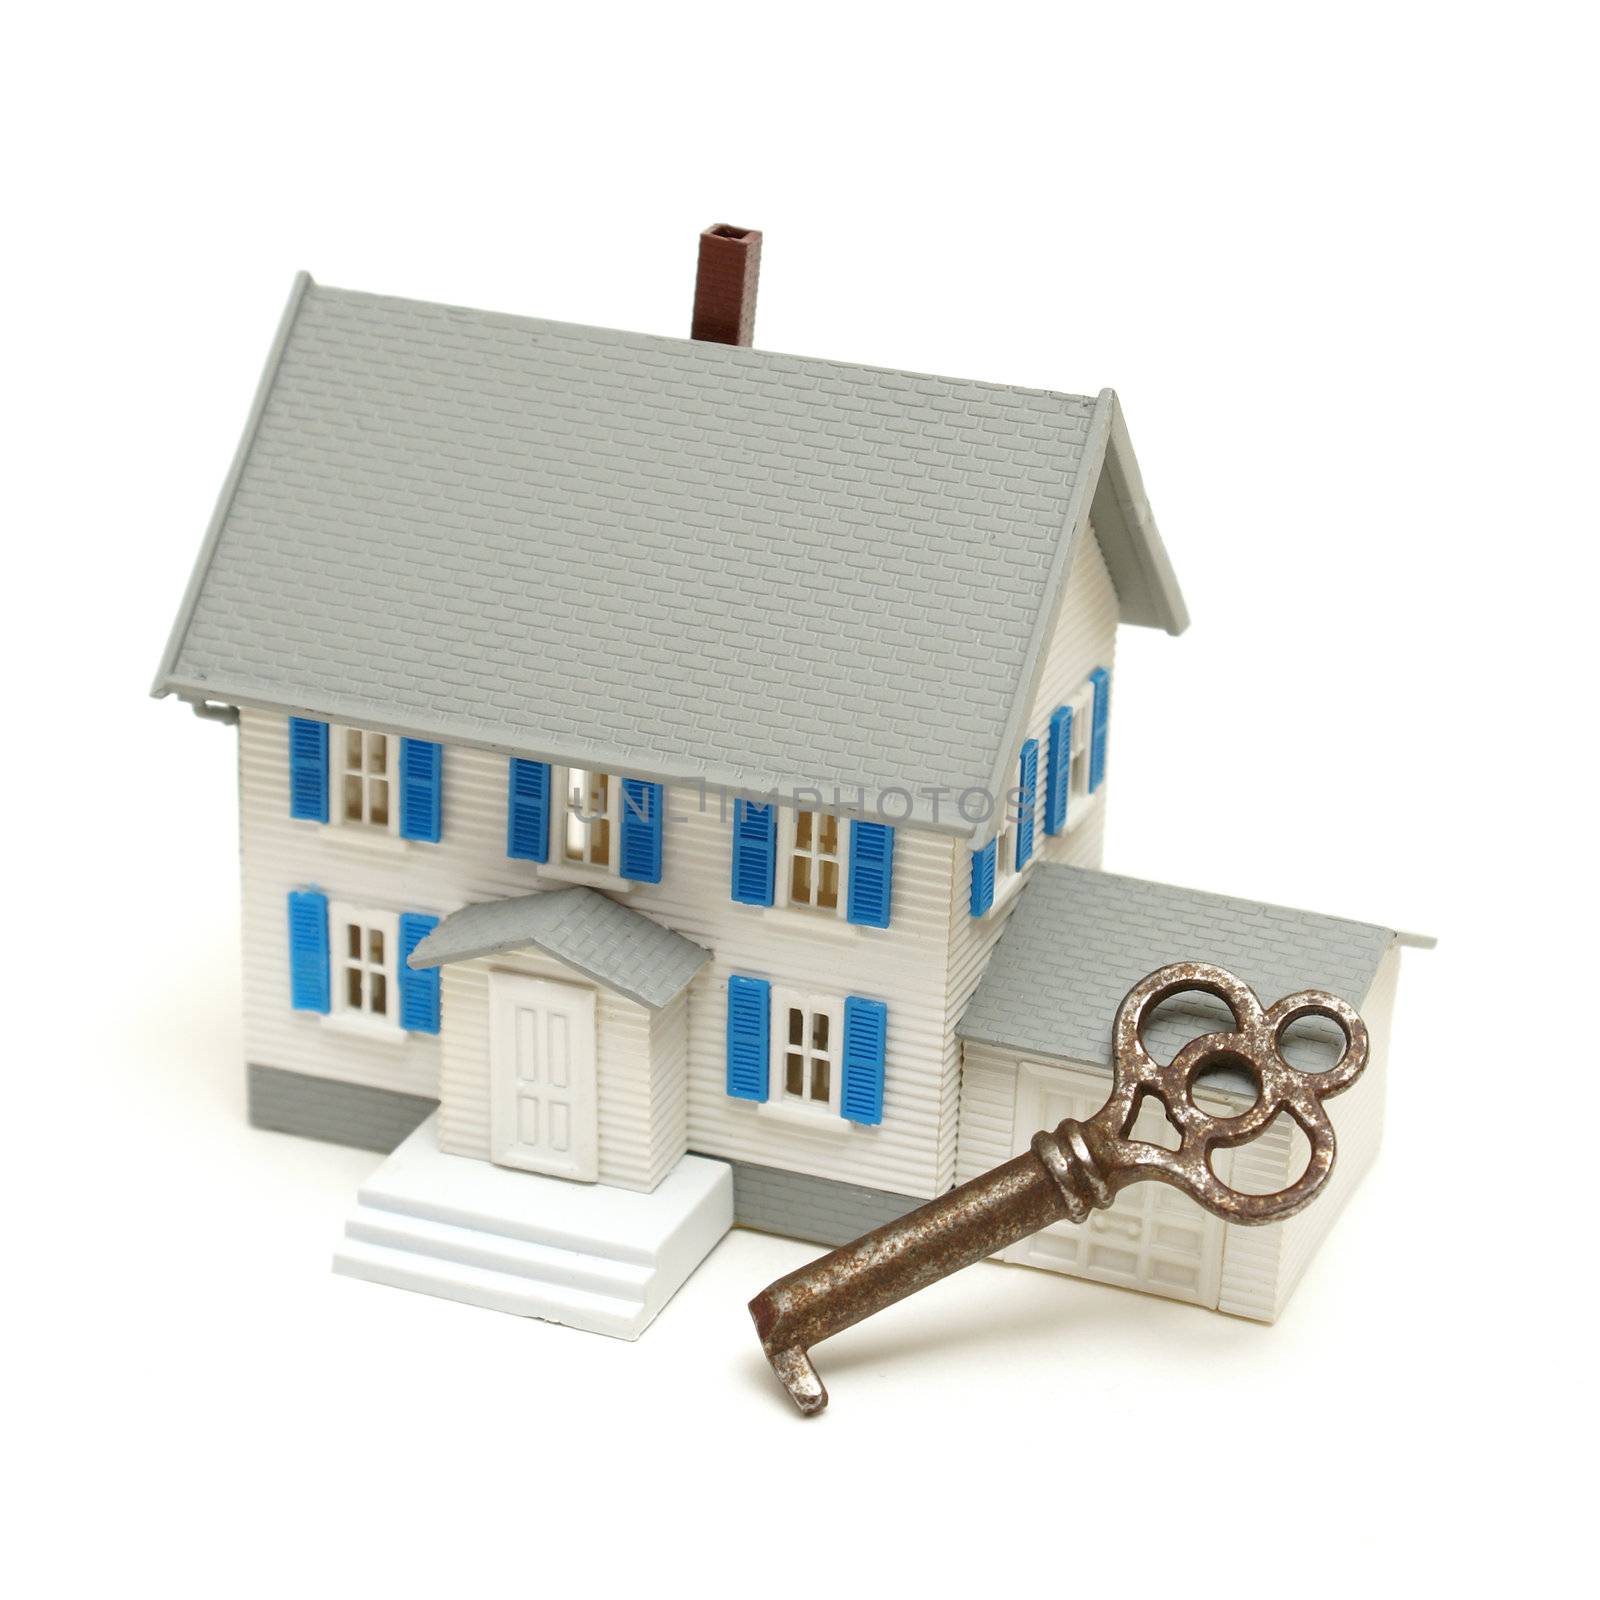 A house and a skeleton key represent home security concepts.